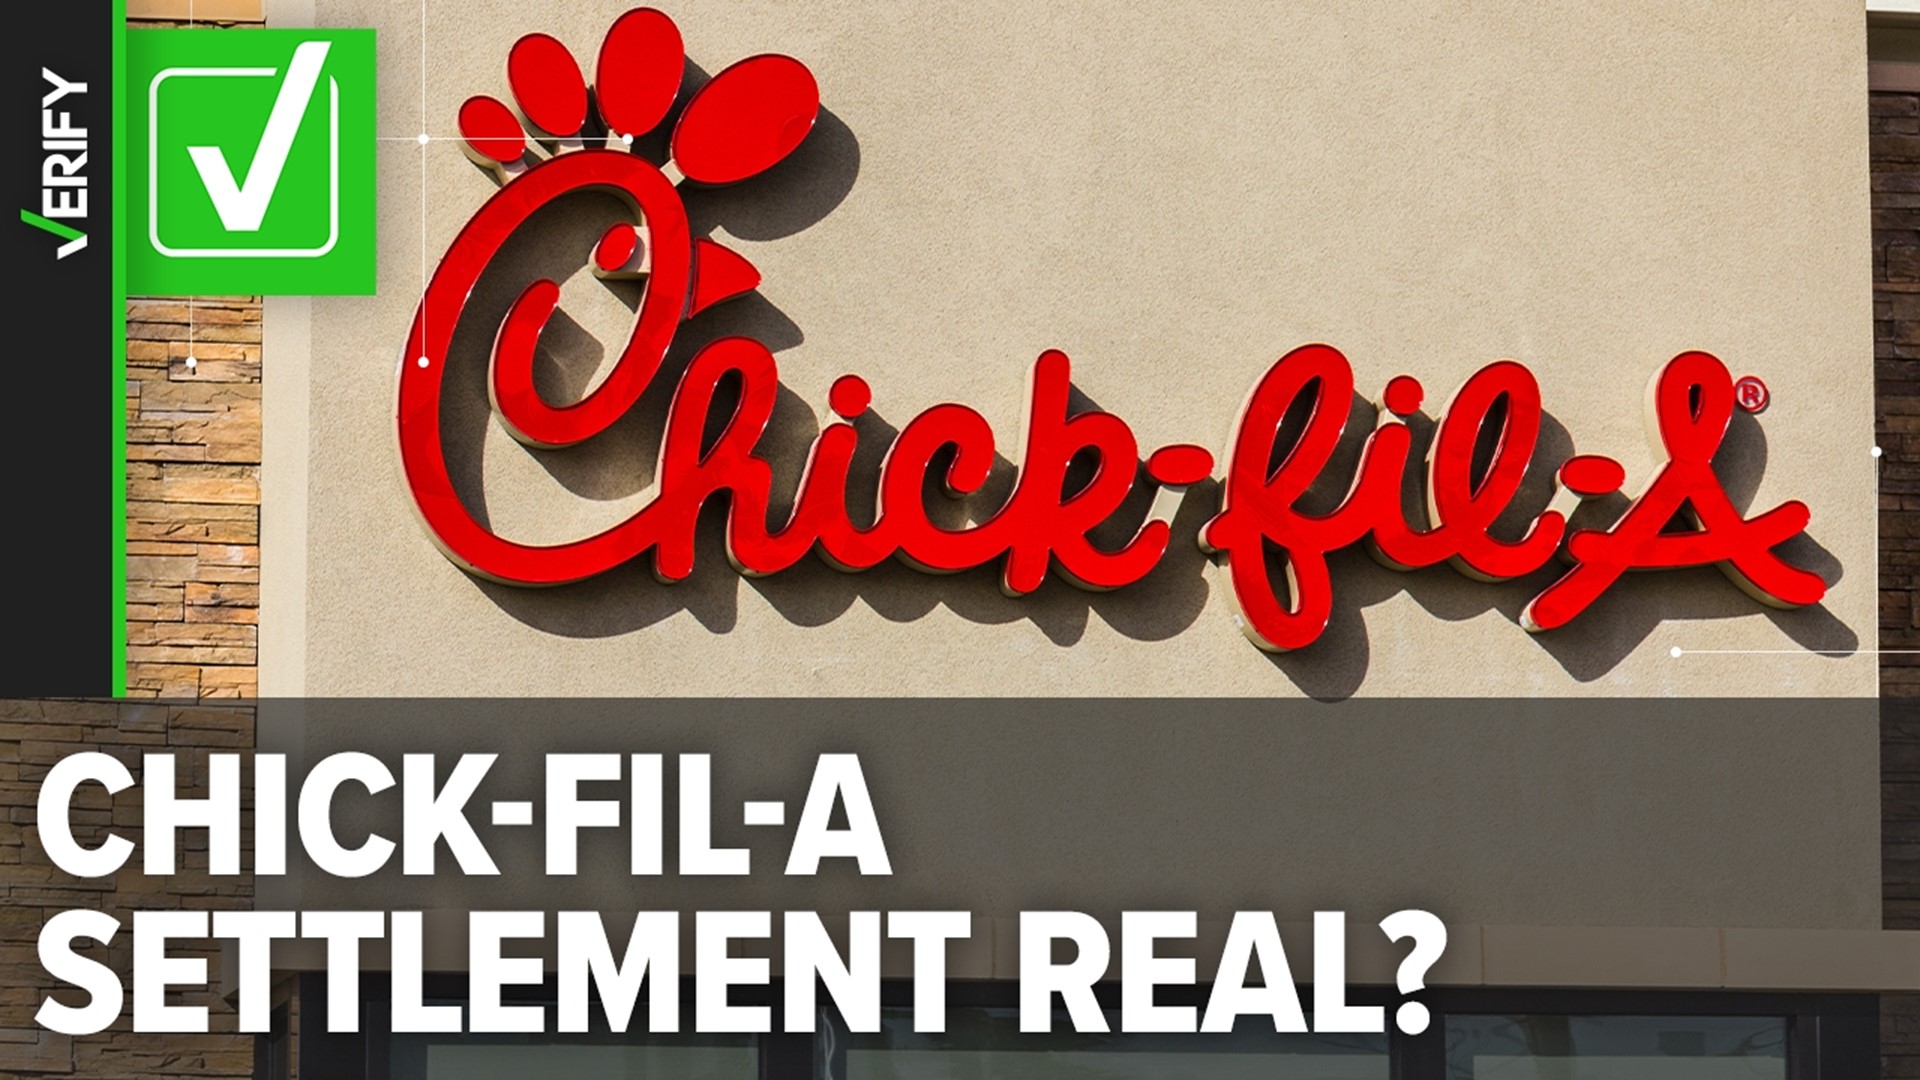 Chick-fil-A has agreed to settle a class action lawsuit over claims that it misrepresented delivery fees. Here’s who’s eligible to file a claim by the deadline.